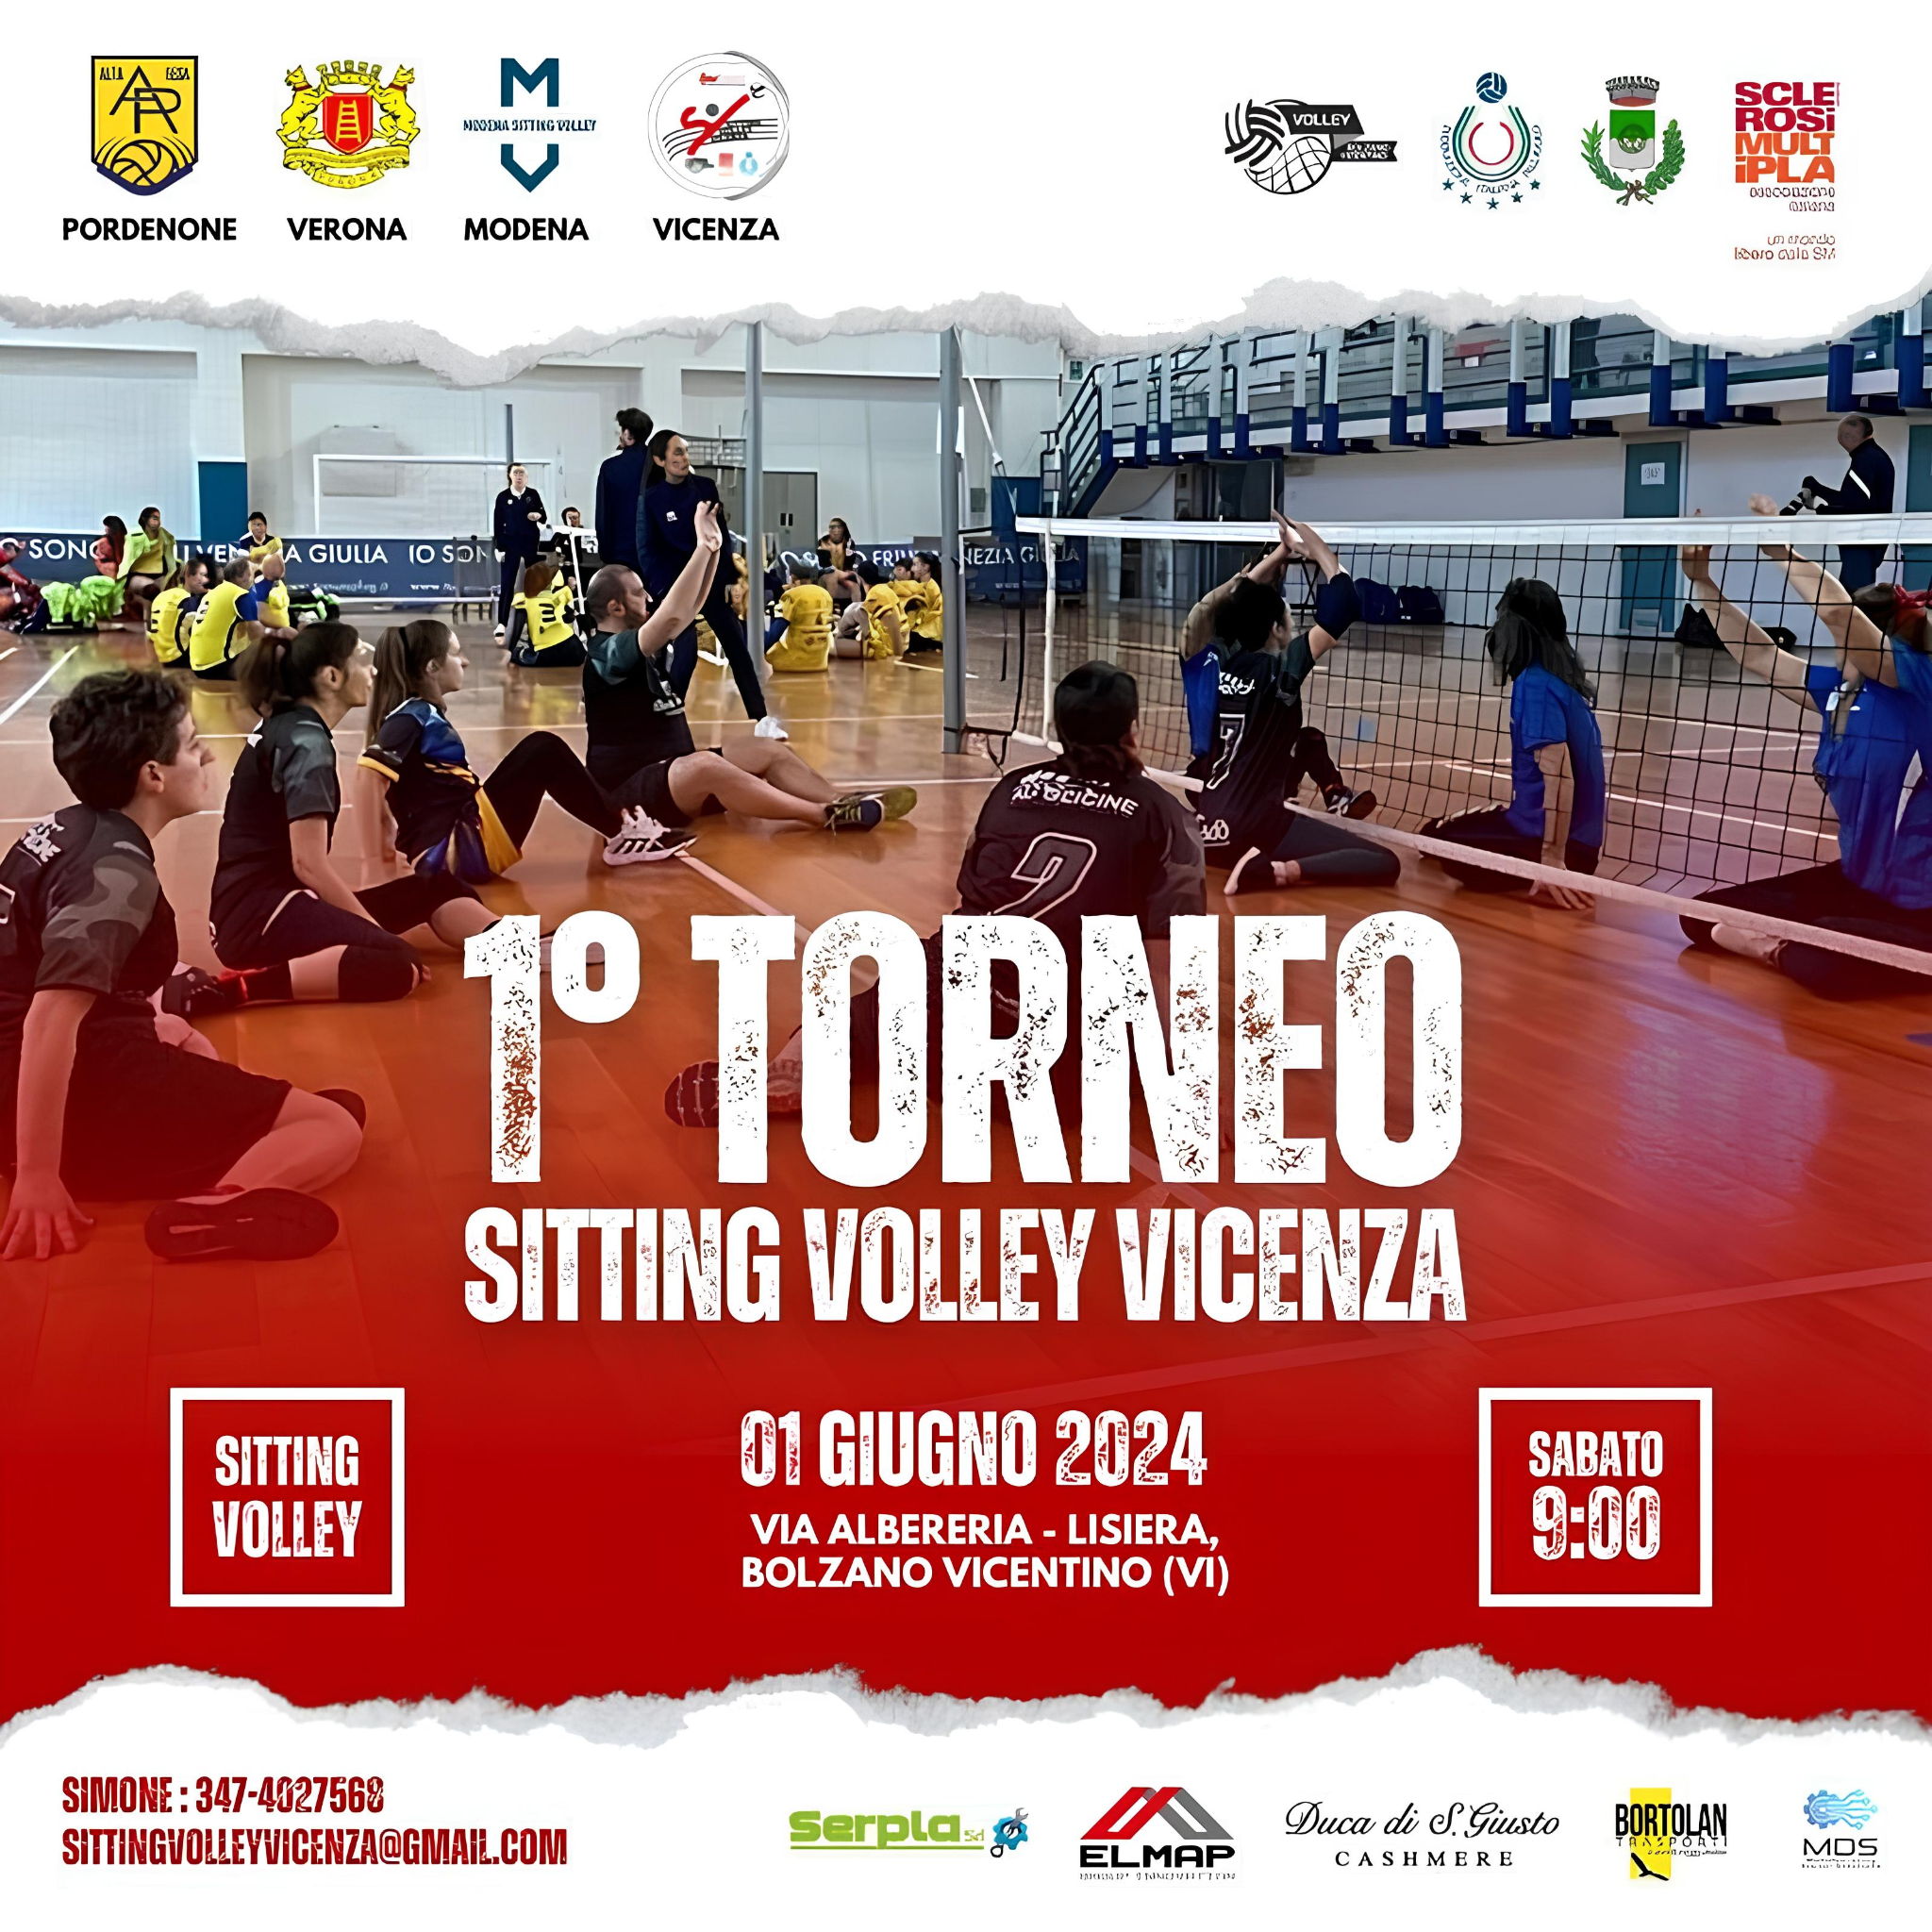 Primo Torneo Sitting Volley